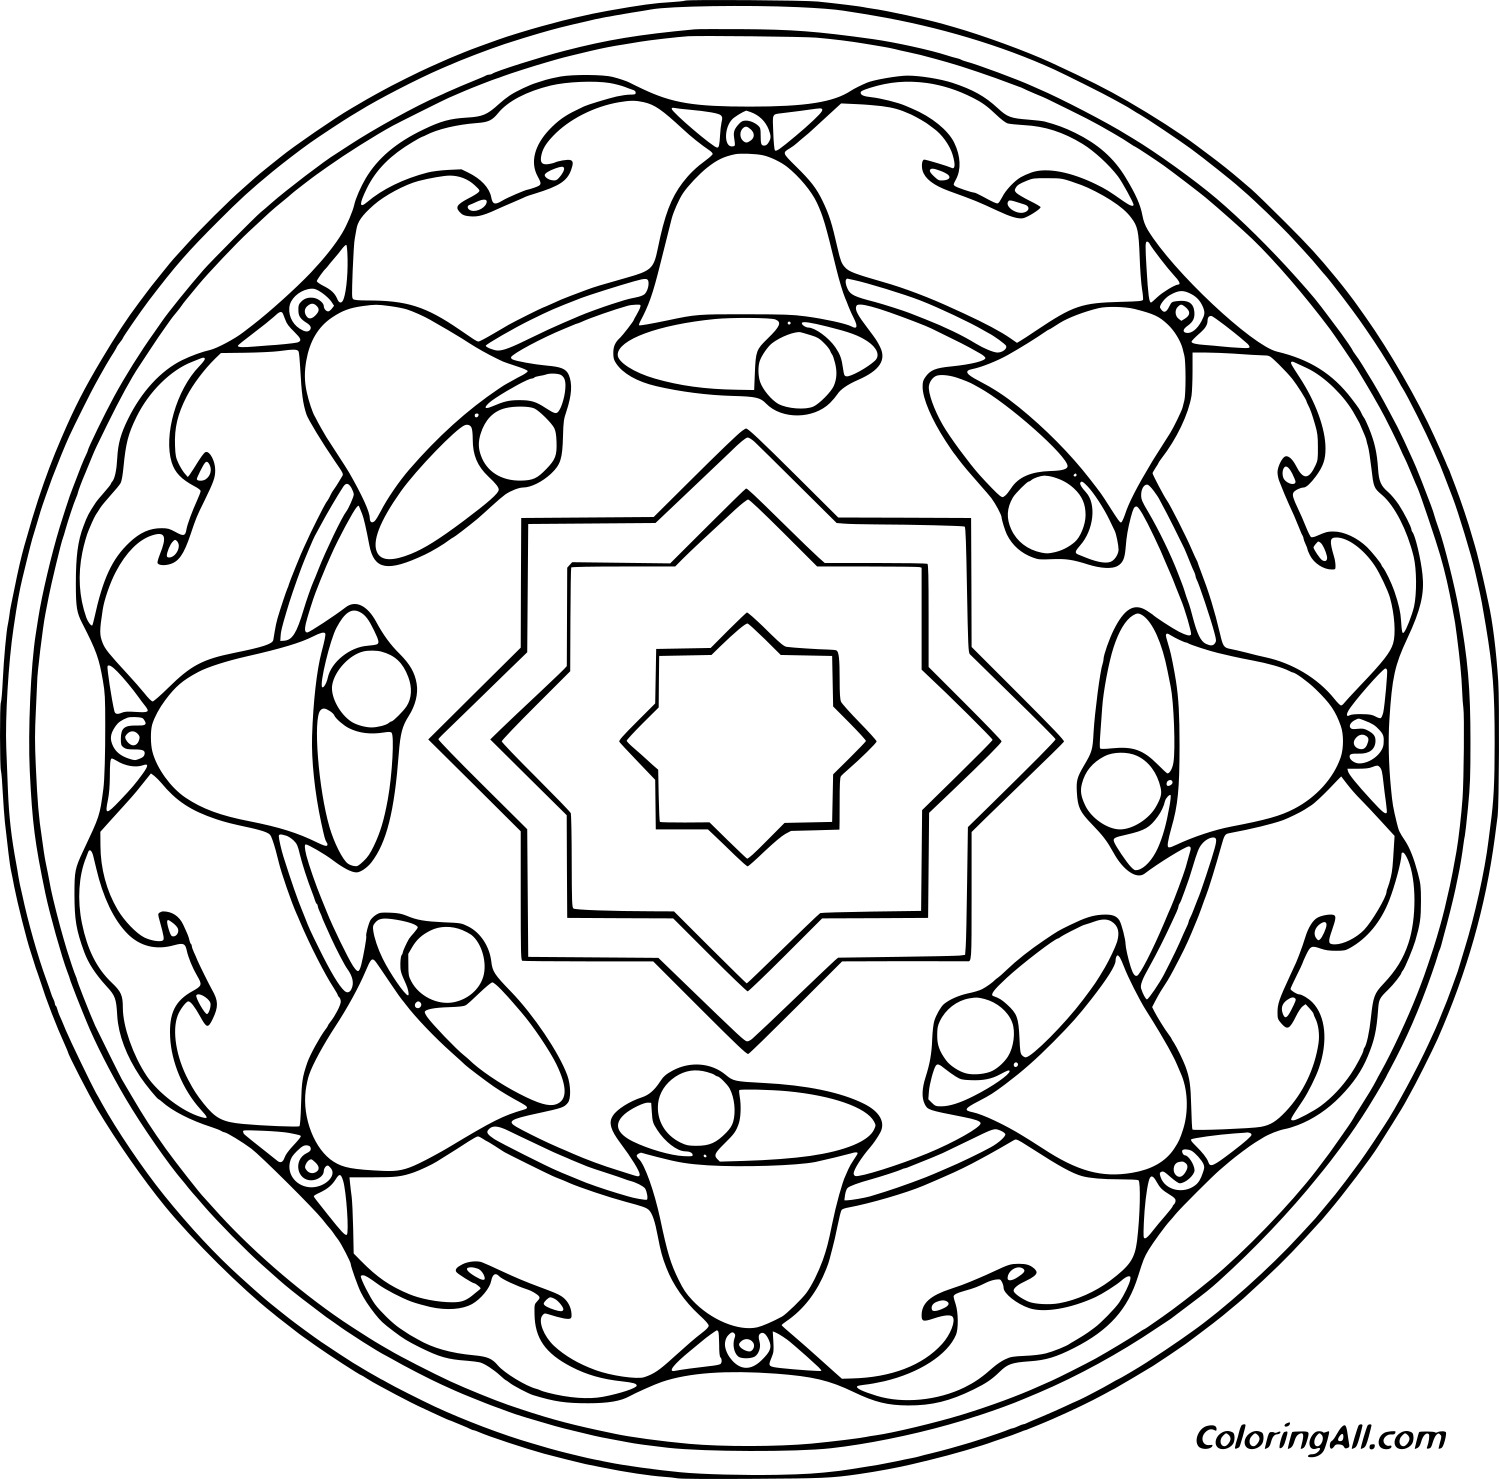 Eight Bells Make A Circle Image For Kids Coloring Page